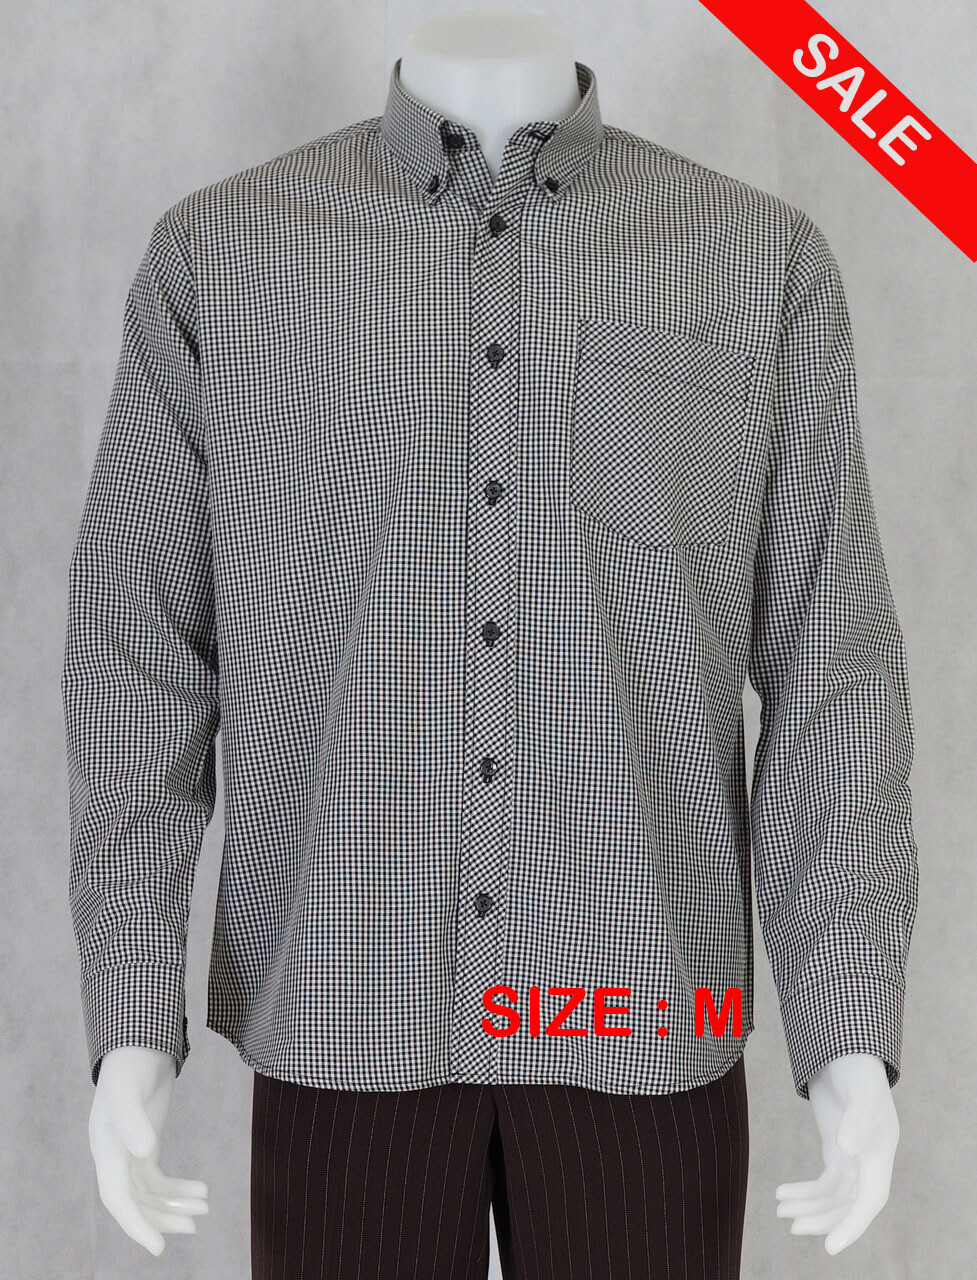 This Shirt Only Long-Sleeve Small  Gingham Black Color Shirt